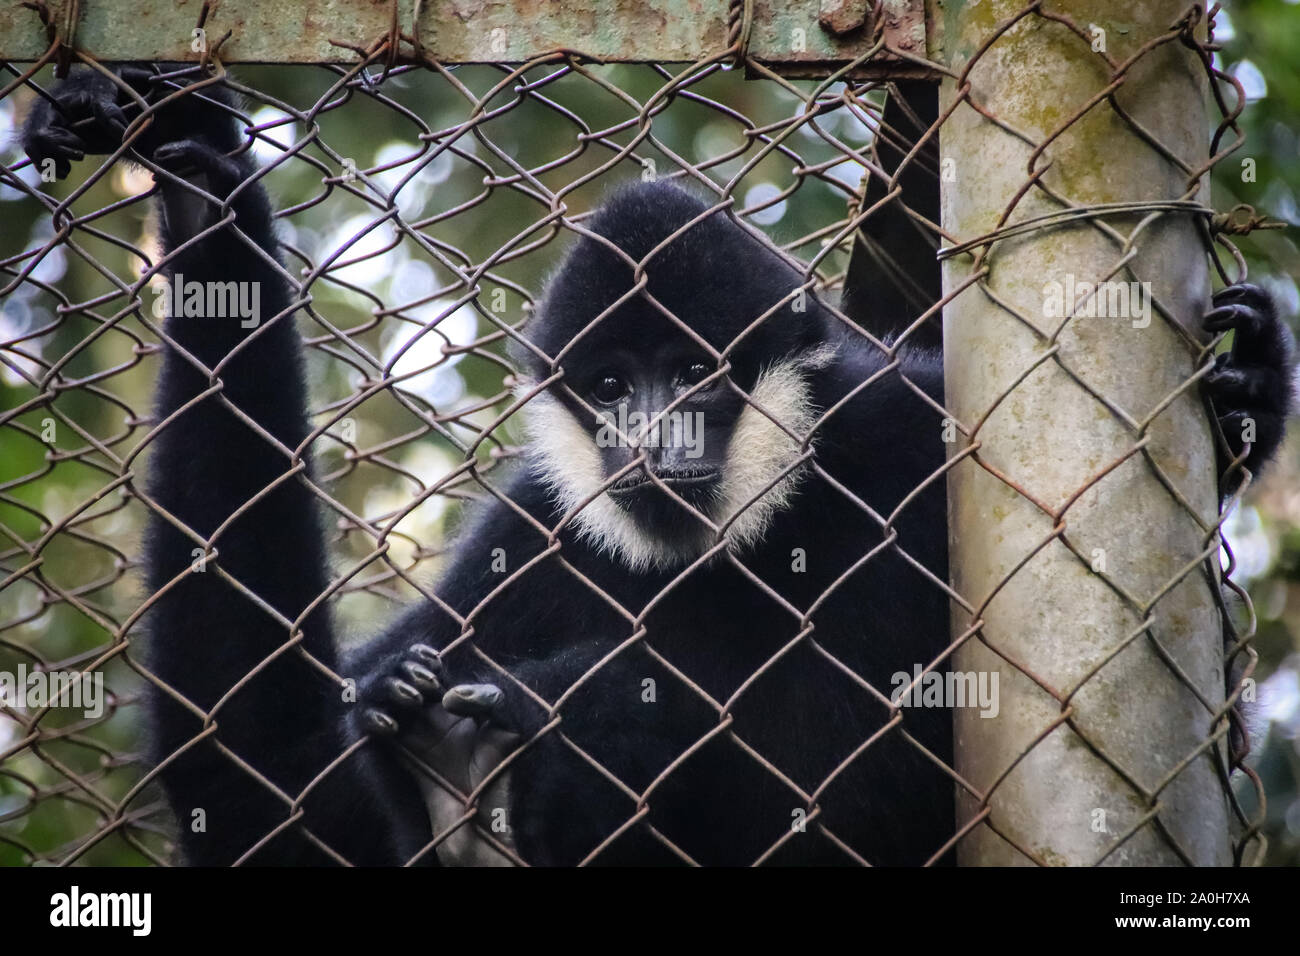 Black Crested Gibbon or Nomascus concolor rescued from poachers and rehabilitated at Cuc Phoung National Park in Ninh Binh, Vietnam Stock Photo